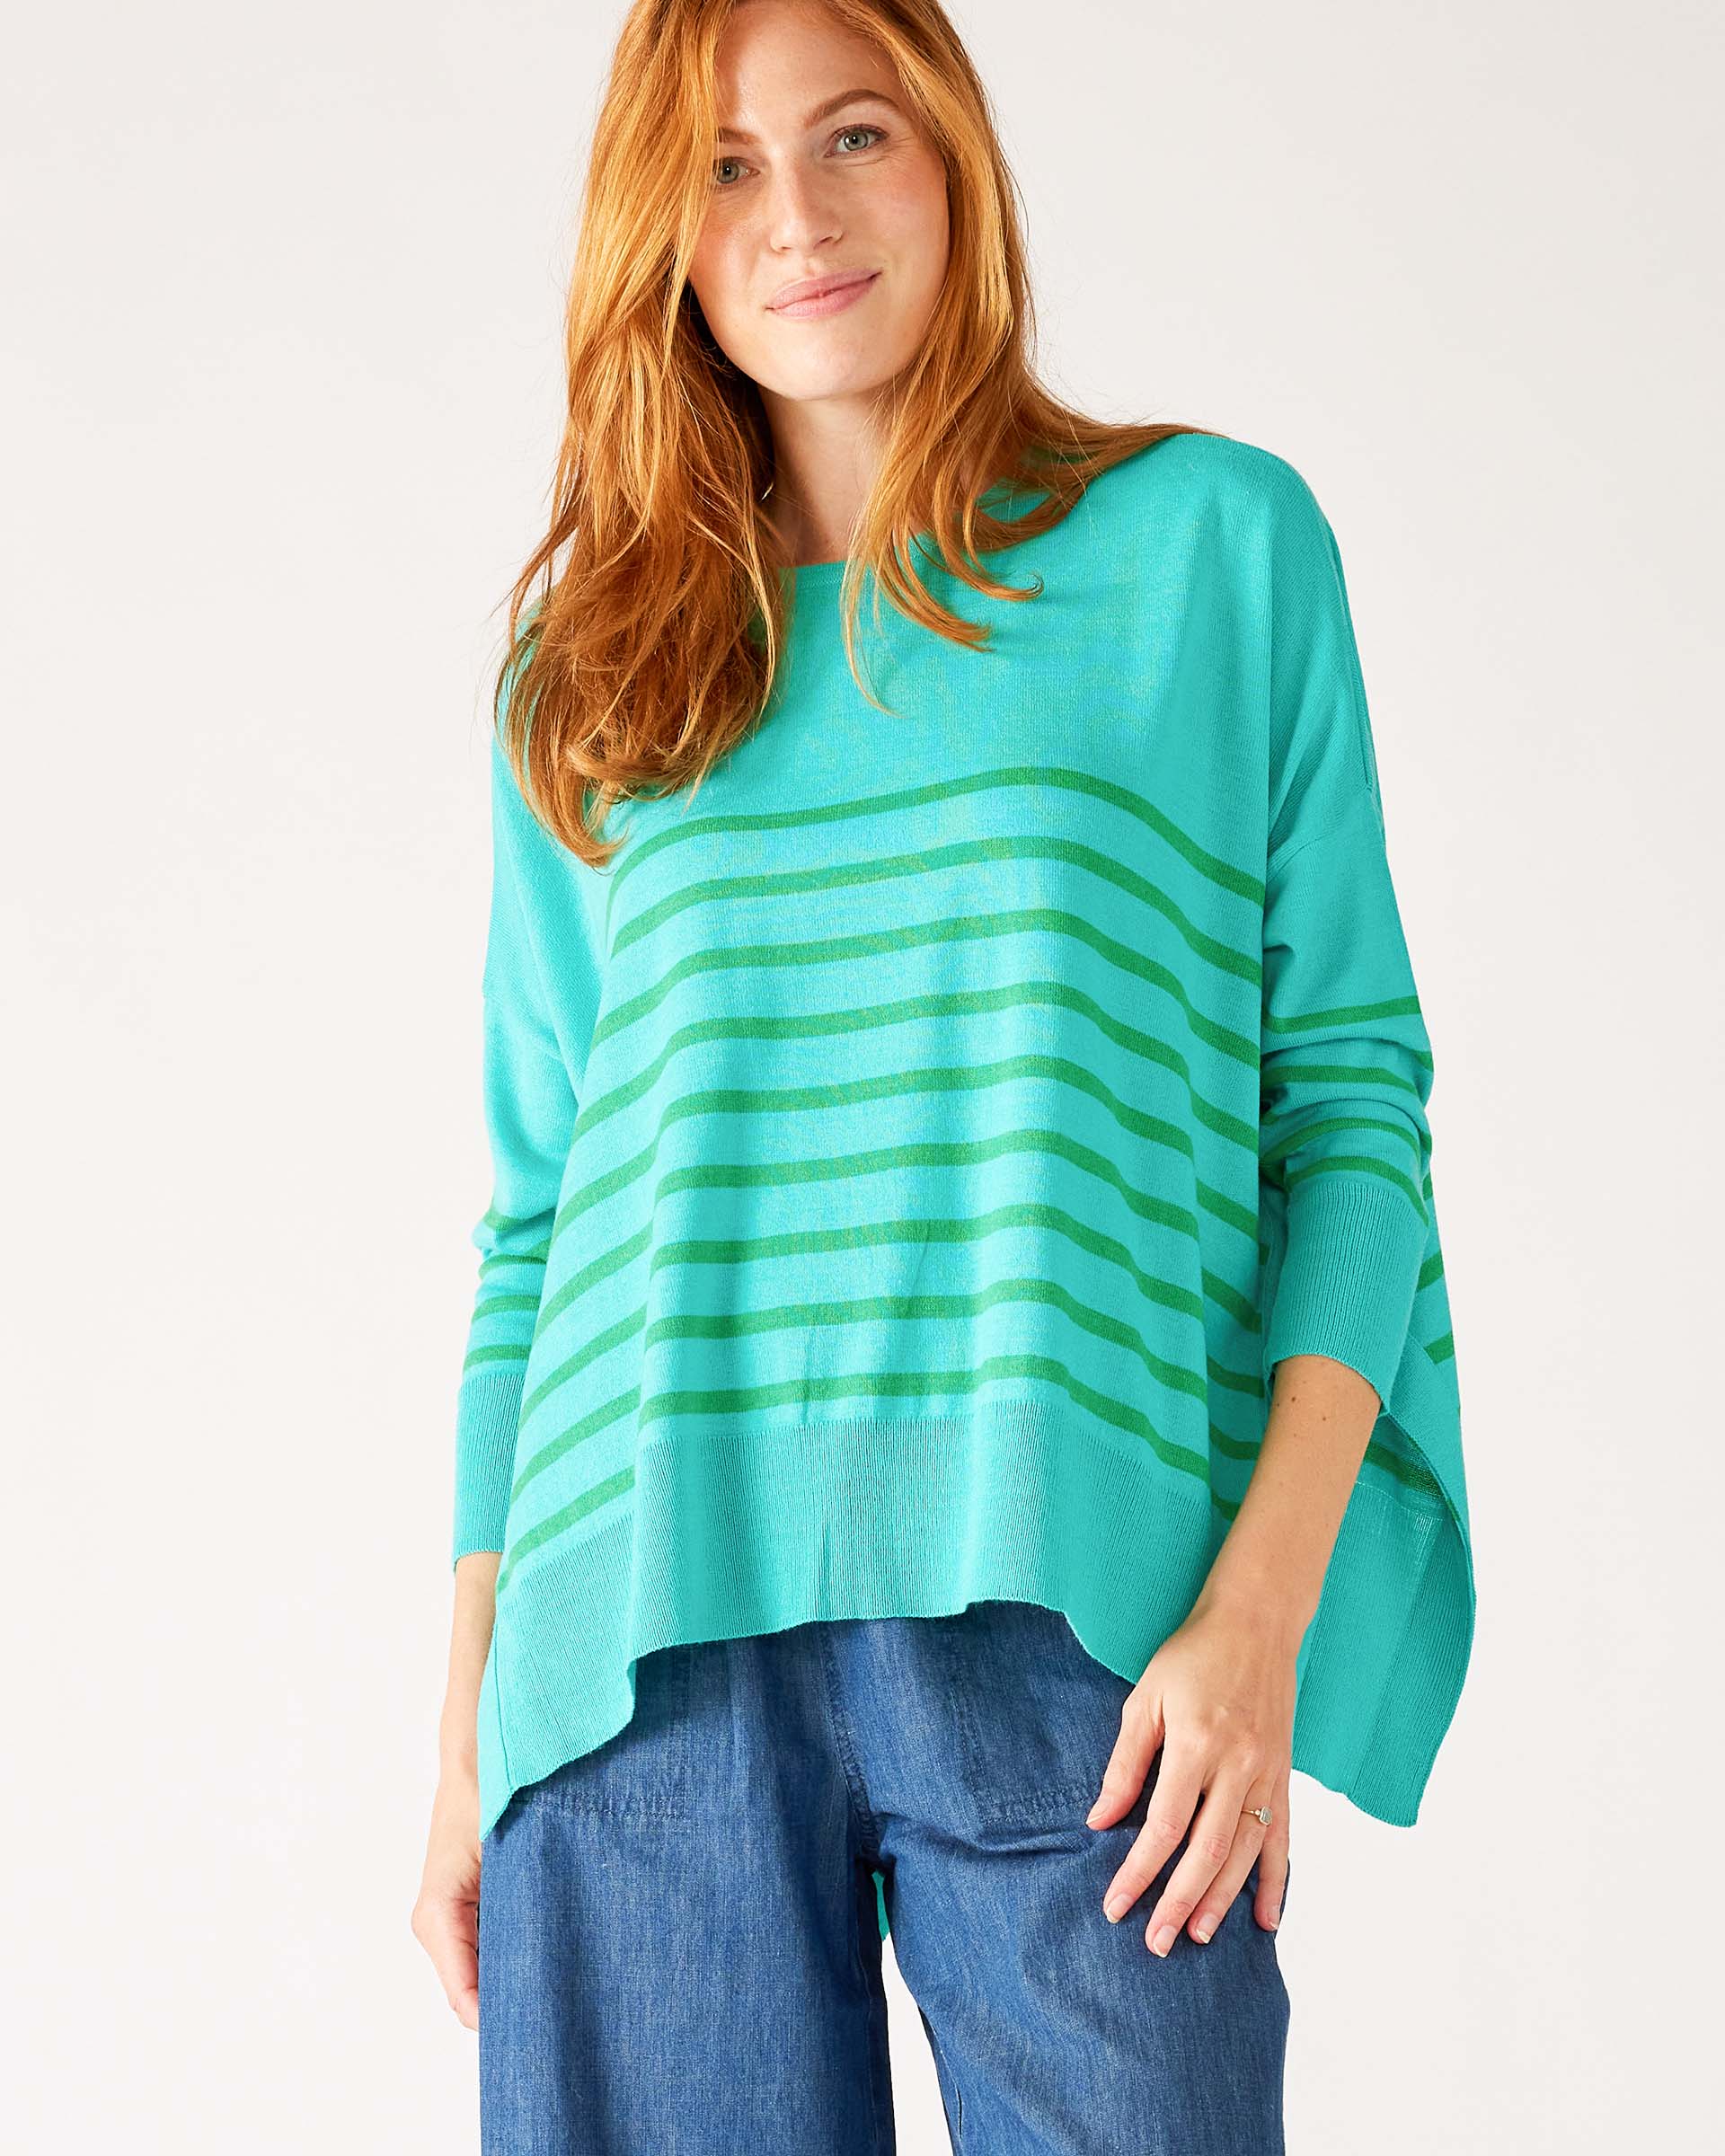 Women's One Size Green Striped Sweater with Pink Hearts on Sleeve Chest View Drape of Fabric